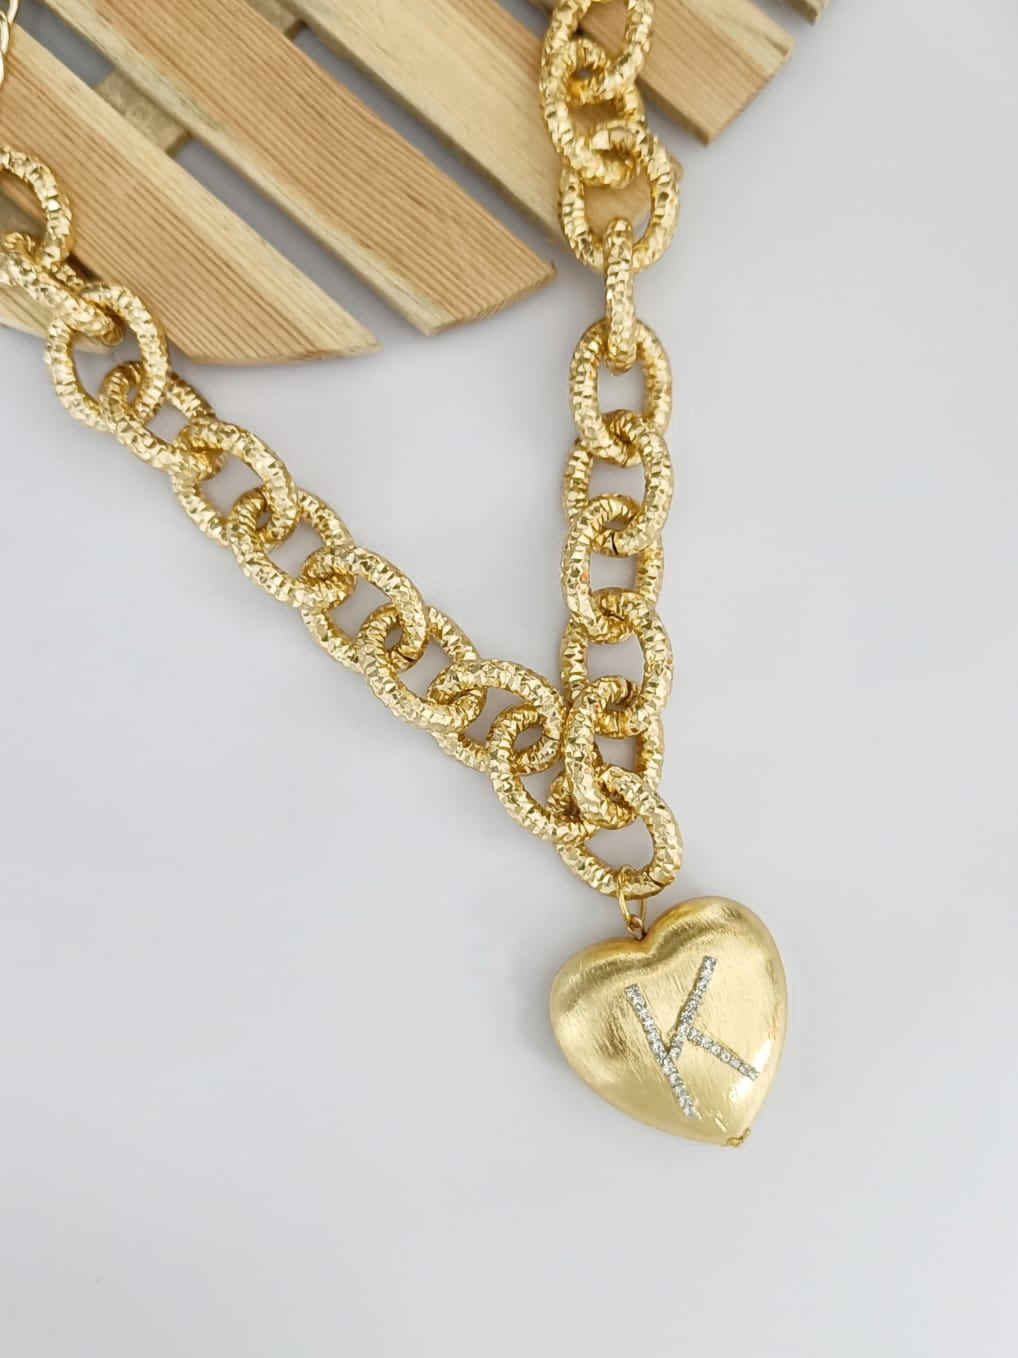 Personalised Initial Heart Chains